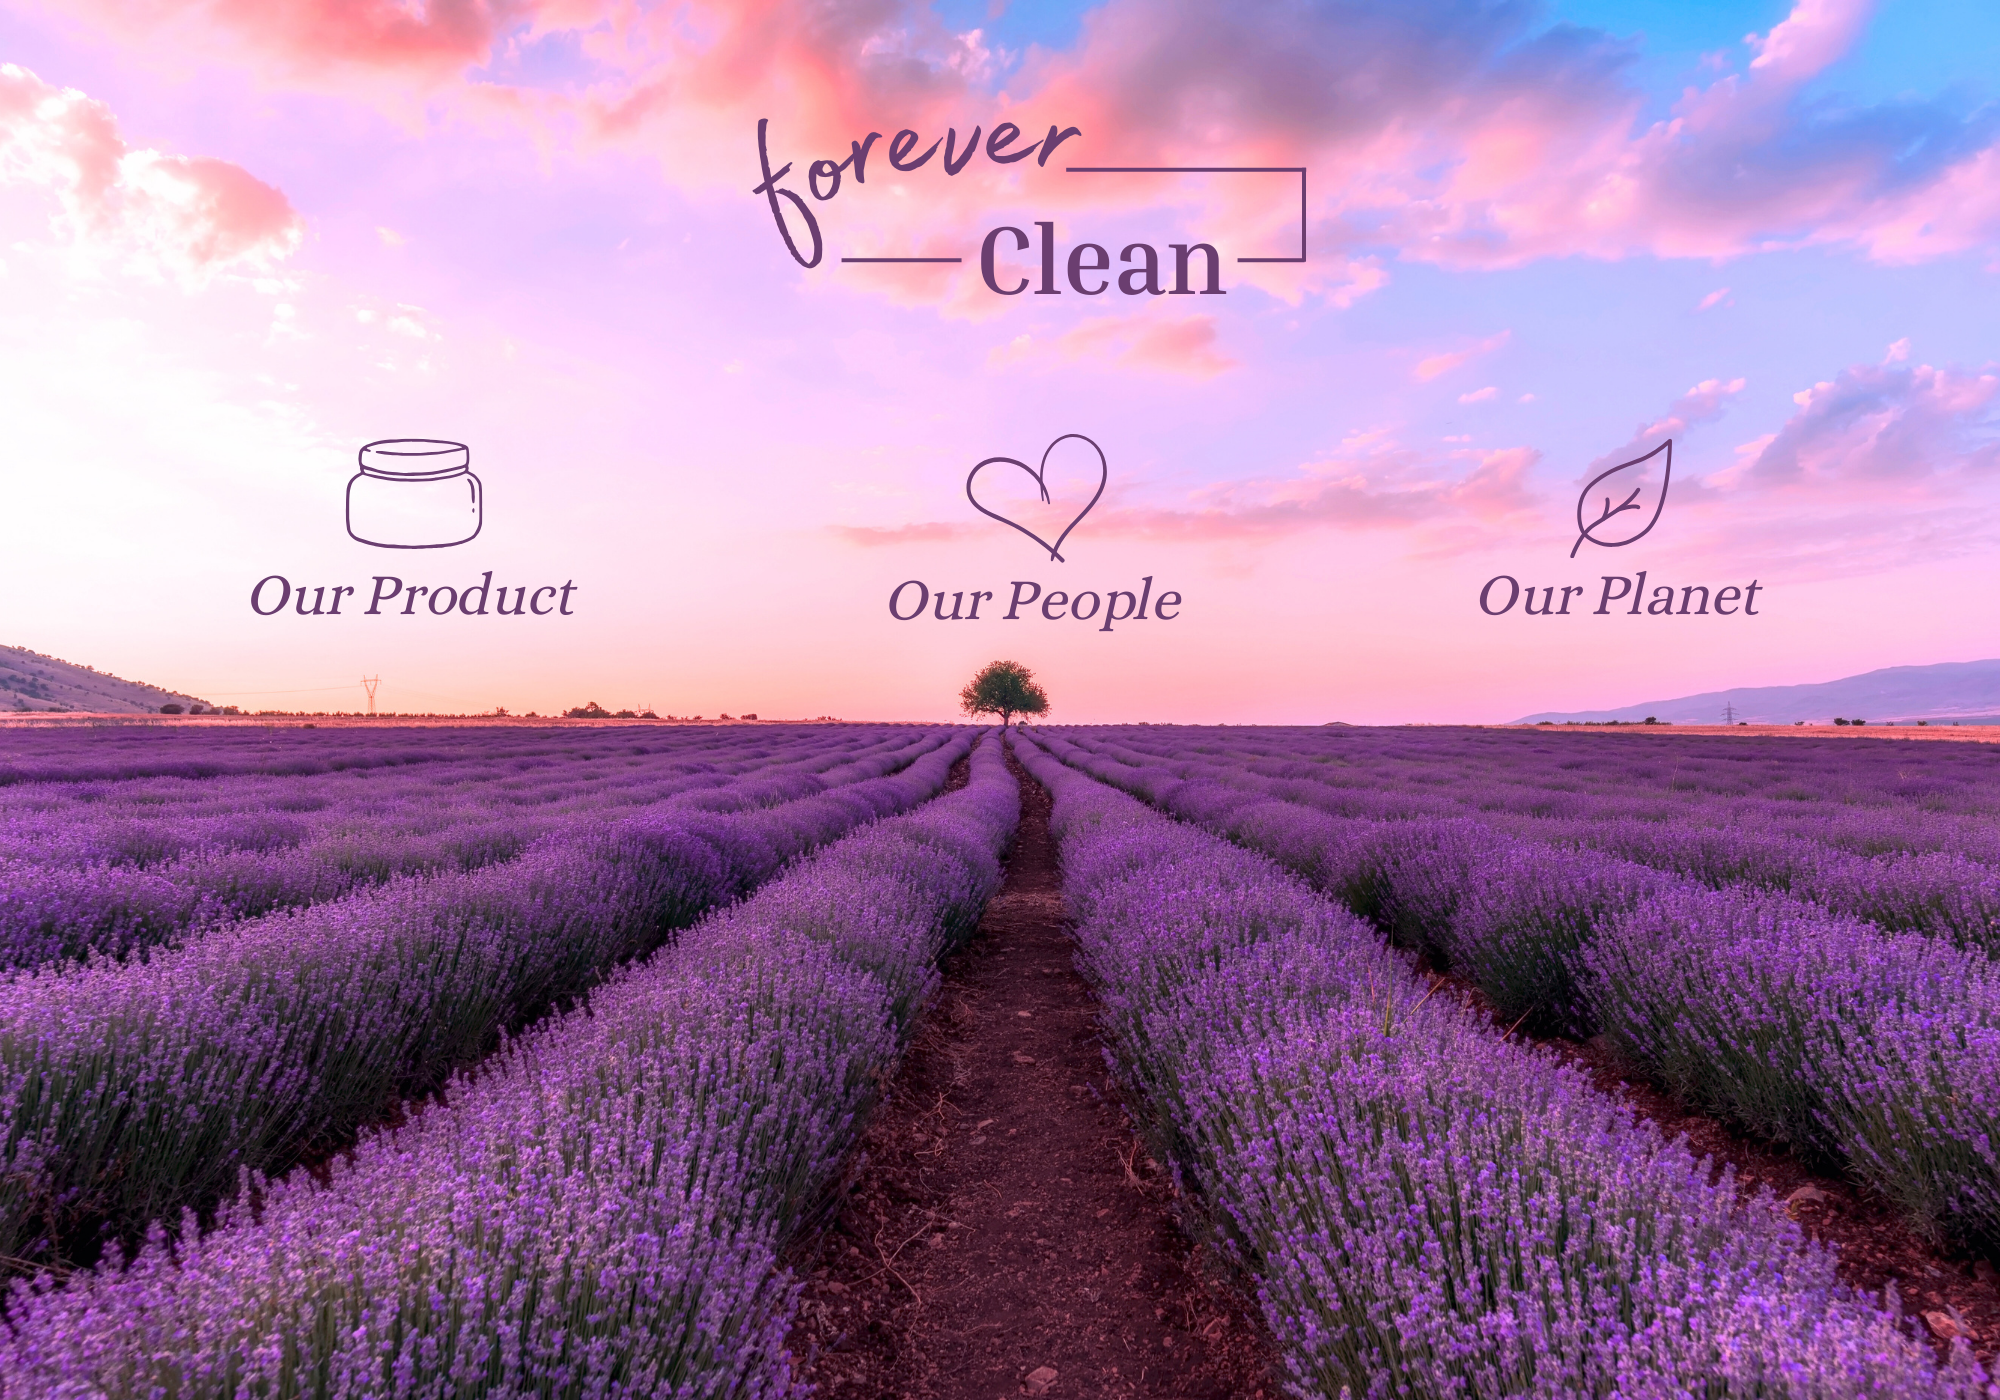 a field of lavender with a path and a tree with heading forever clean and three sub-headings: Our product, our people and our planet